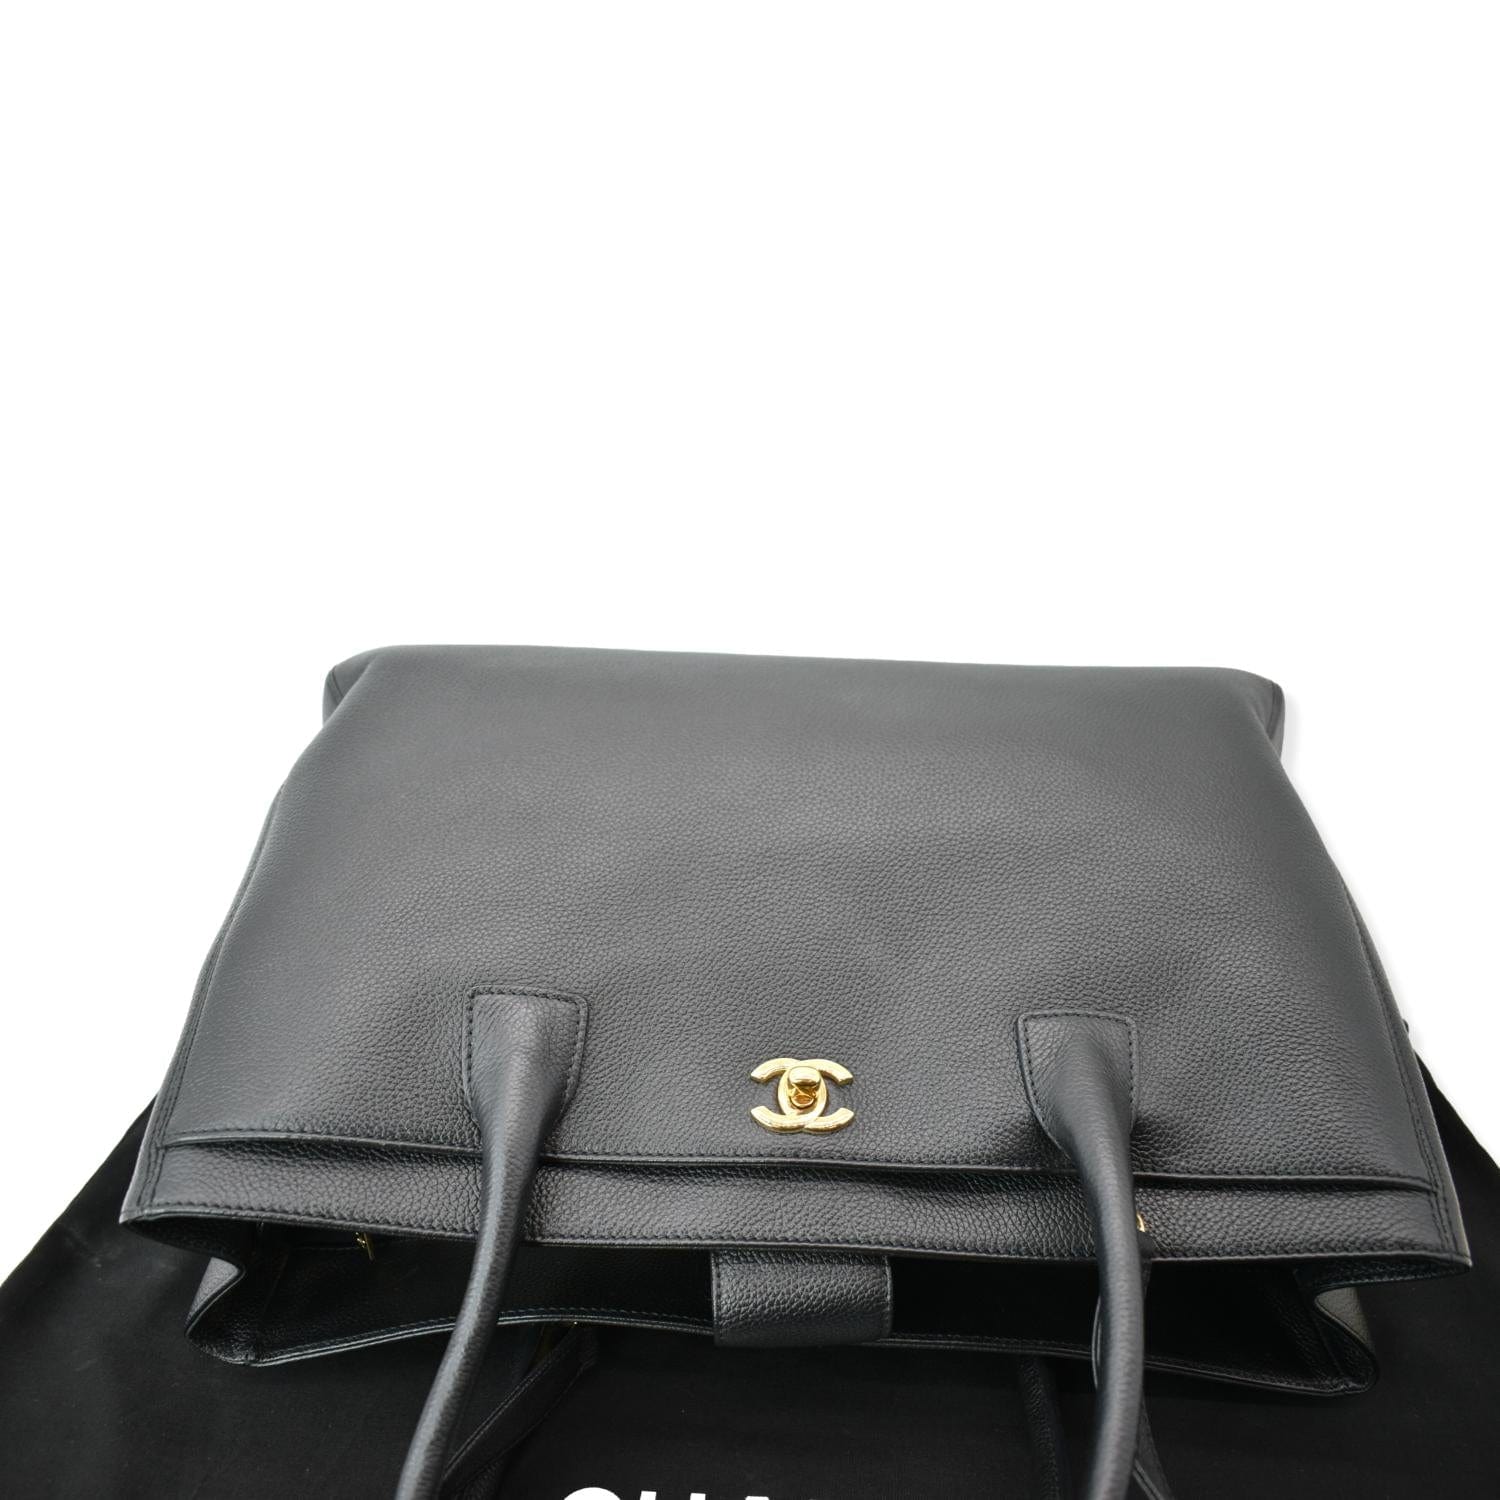 CHANEL EXECUTIVE TOTE BAG, black caviar leather with silver tone